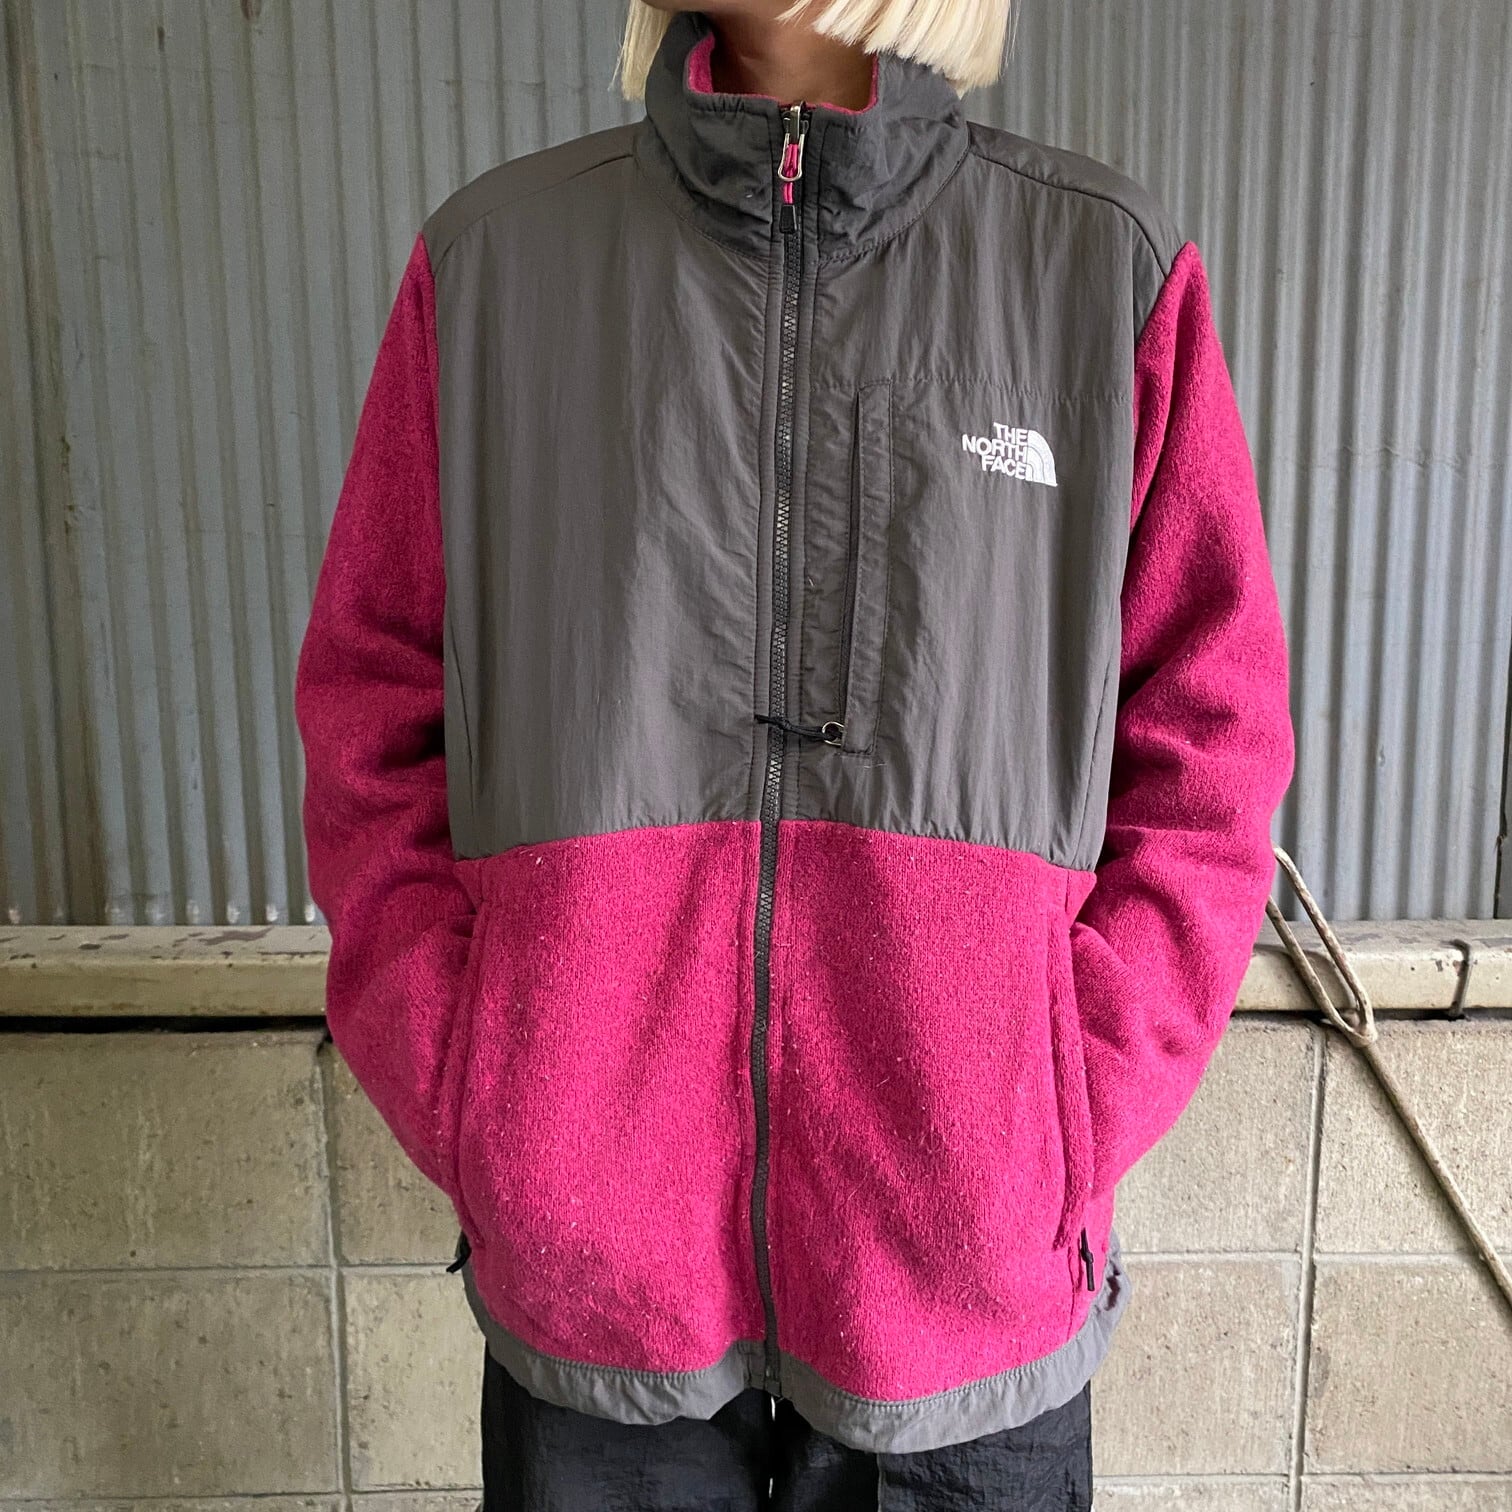 A/W THE NORTH FACE ザノースフェイス デナリジャケット